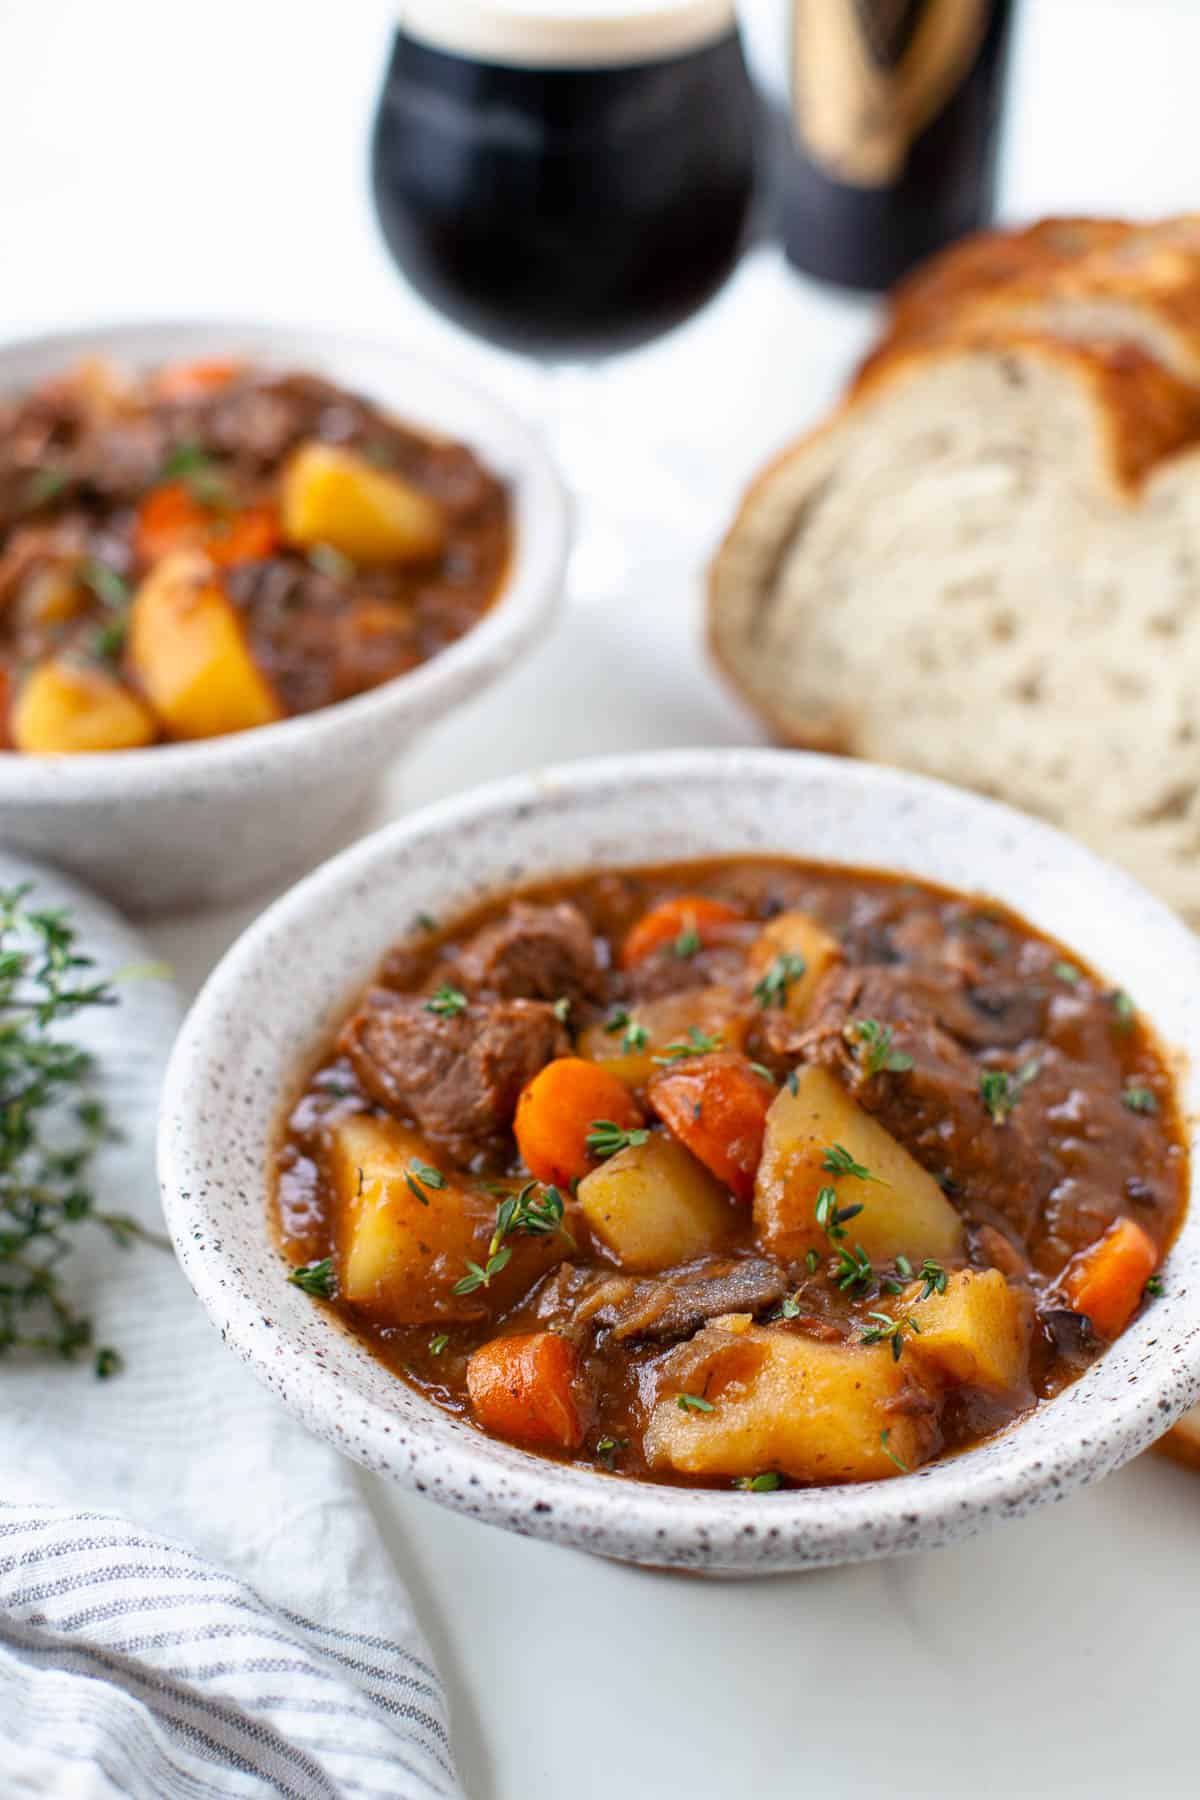 beef stew in a white speckled bowl, slices of bread, glass and can of guinness